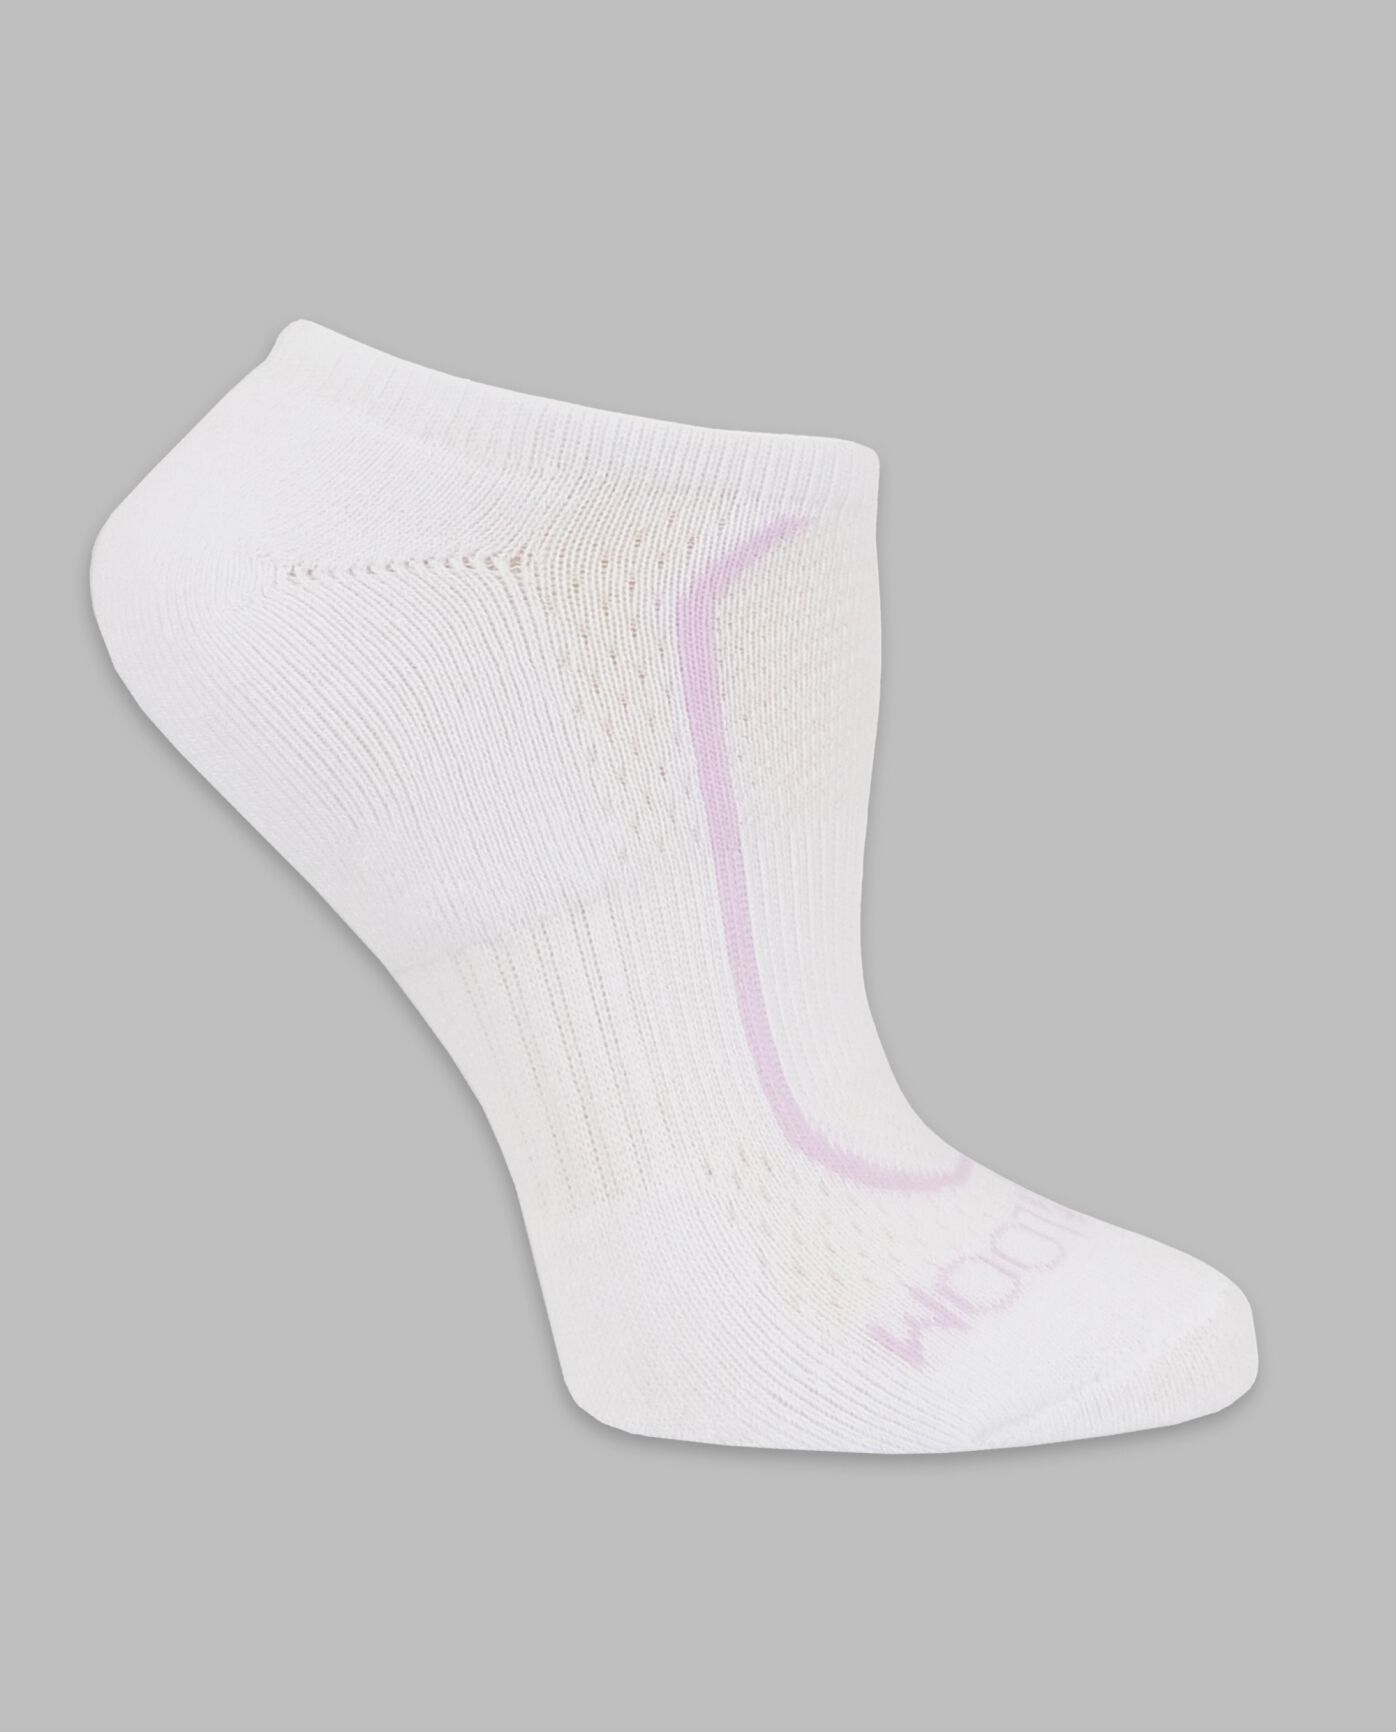 Women's CoolZone® No Show Socks Assorted White, 6 Pack, Size 8-12 ASSORTED WHITE